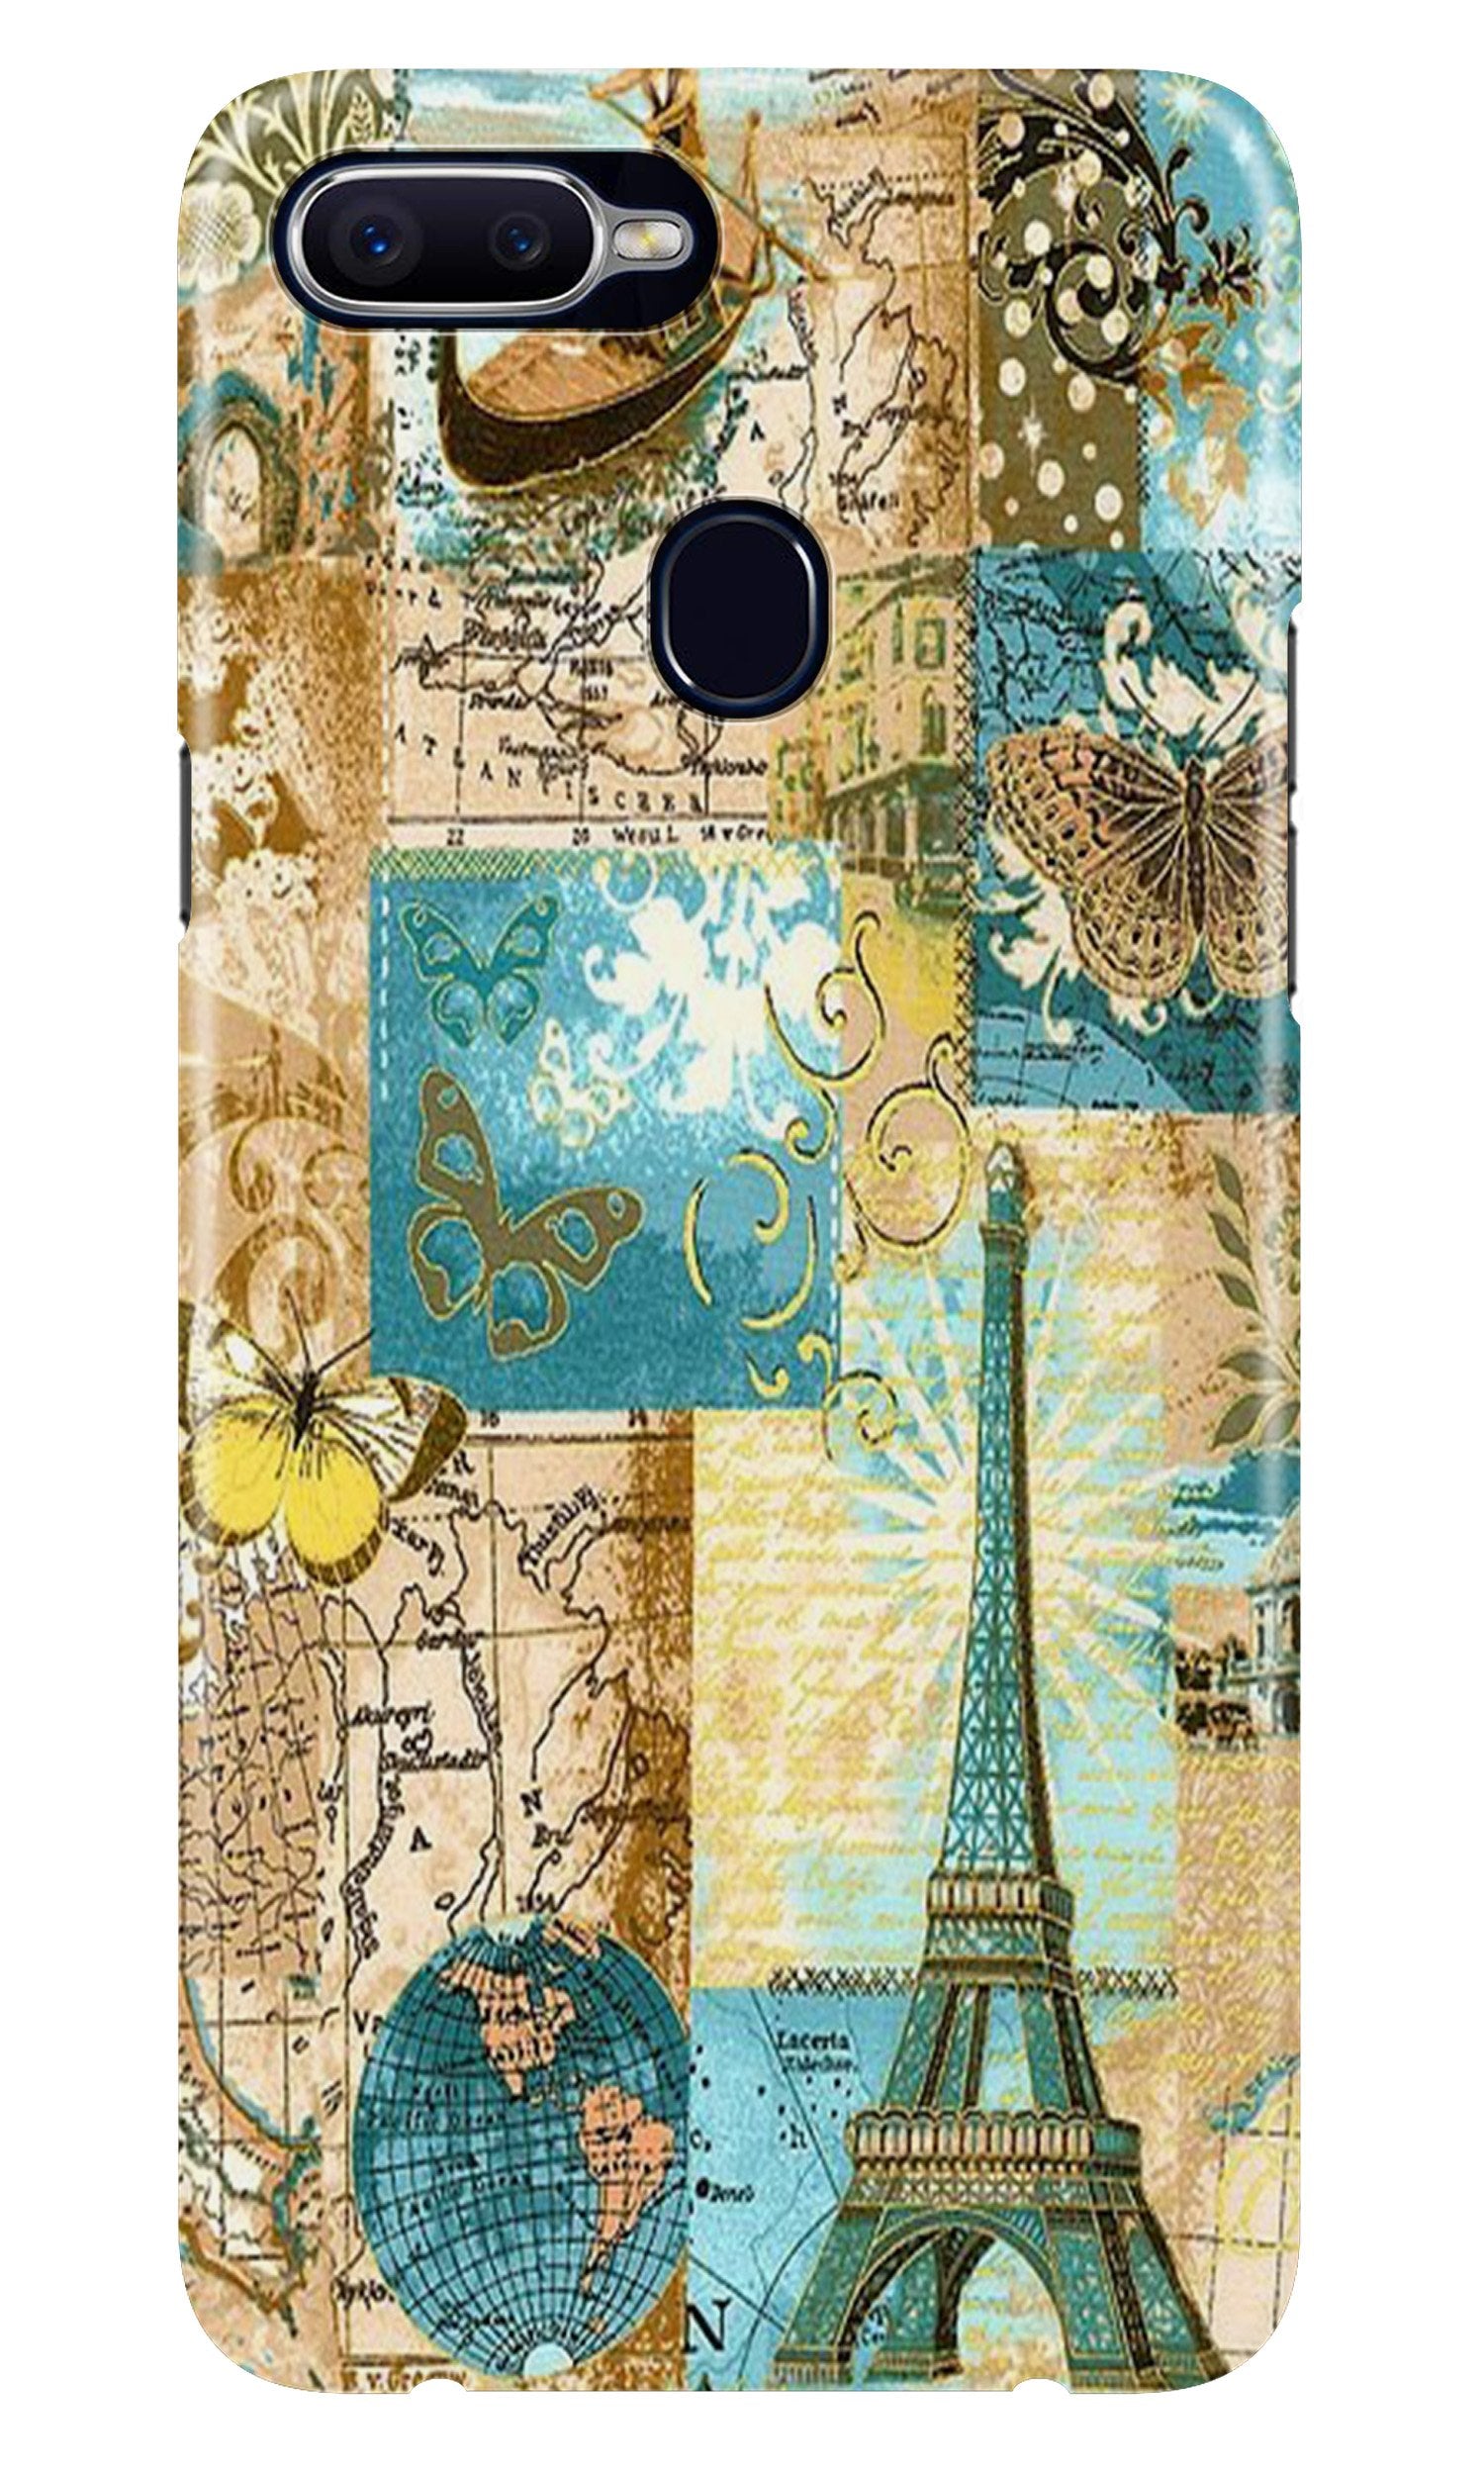 Travel Eiffel Tower Case for Oppo A7 (Design No. 206)